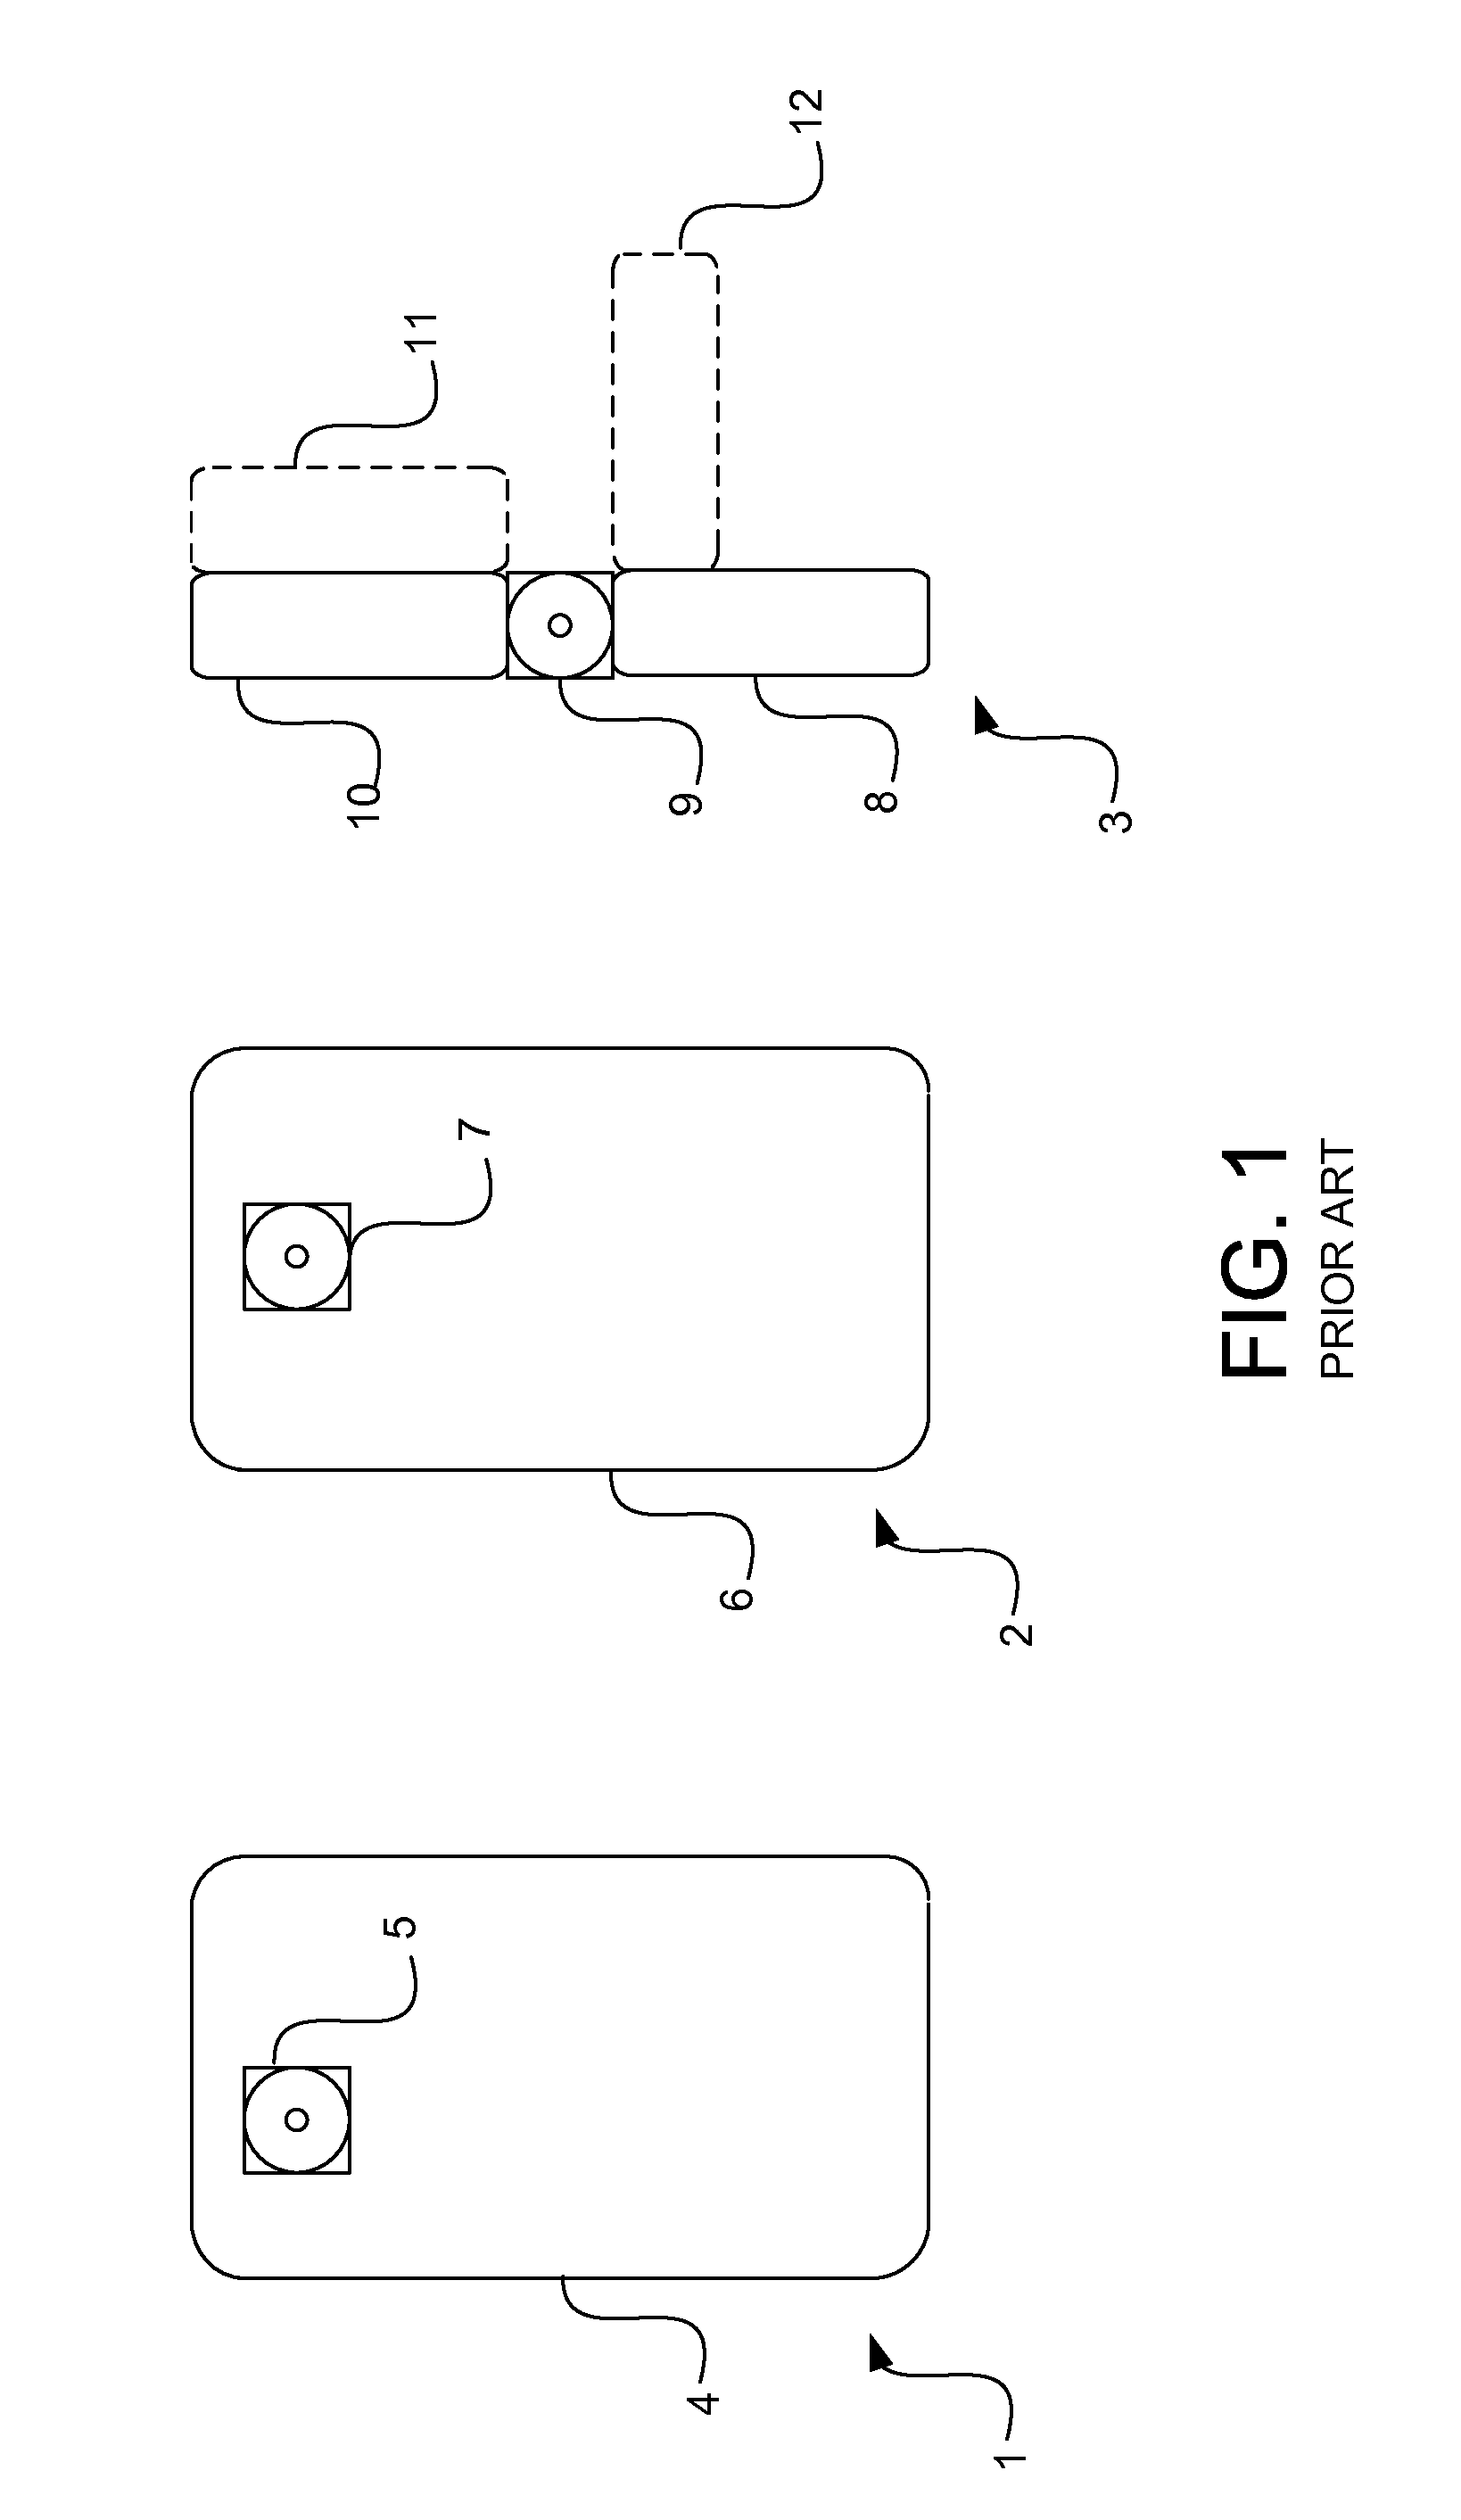 Method of stereoscopic 3D image capture using a mobile device, cradle or dongle